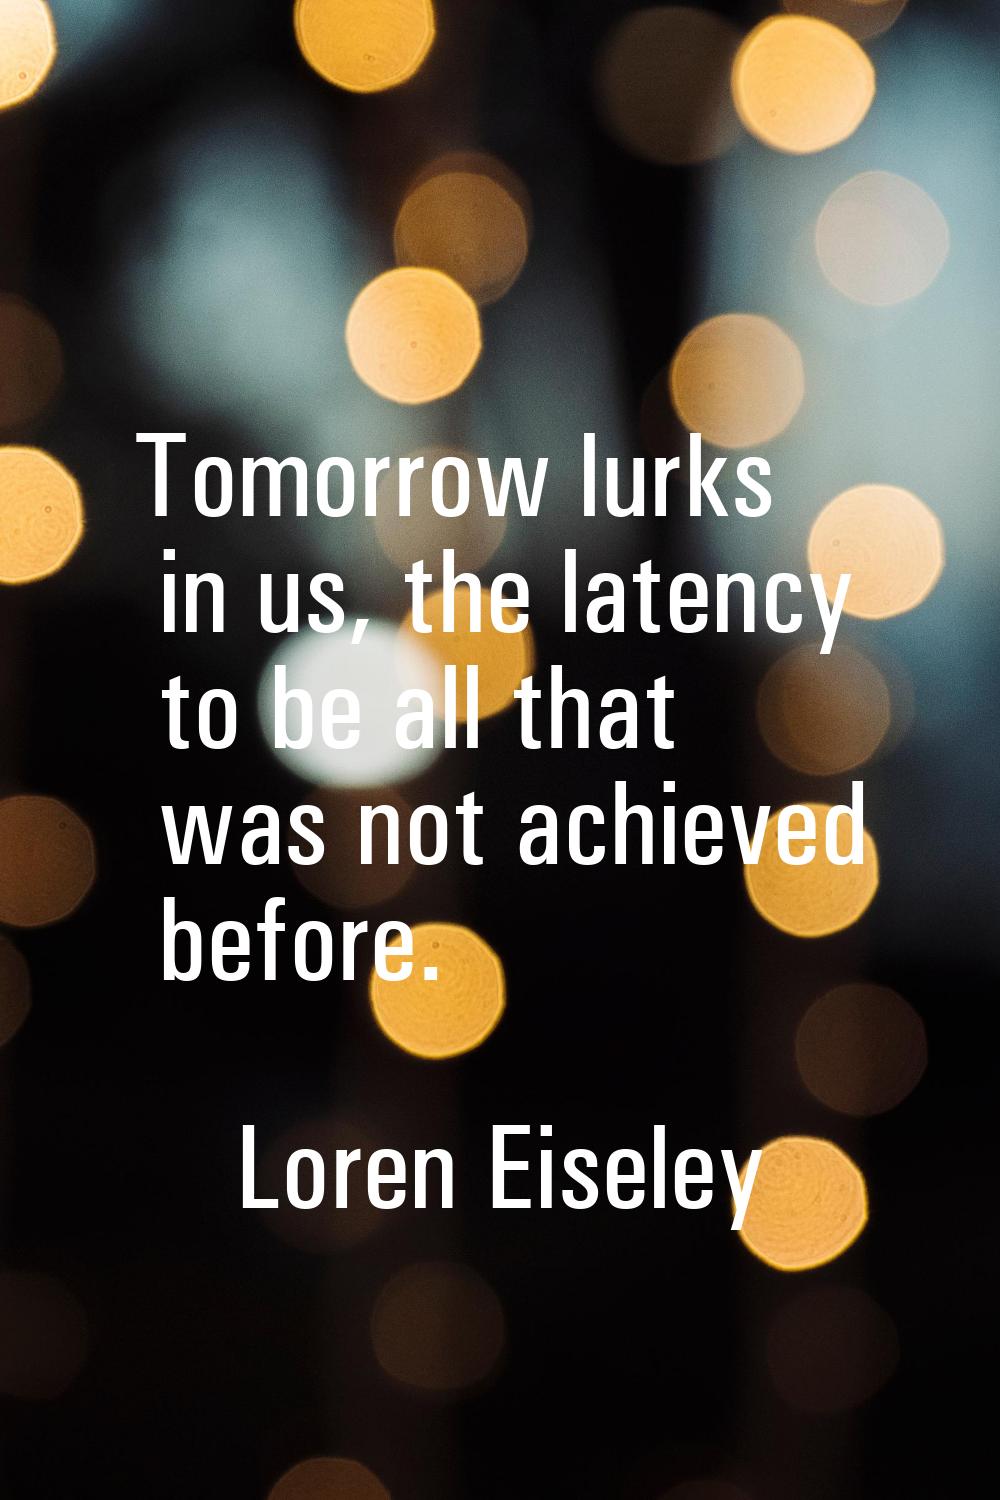 Tomorrow lurks in us, the latency to be all that was not achieved before.